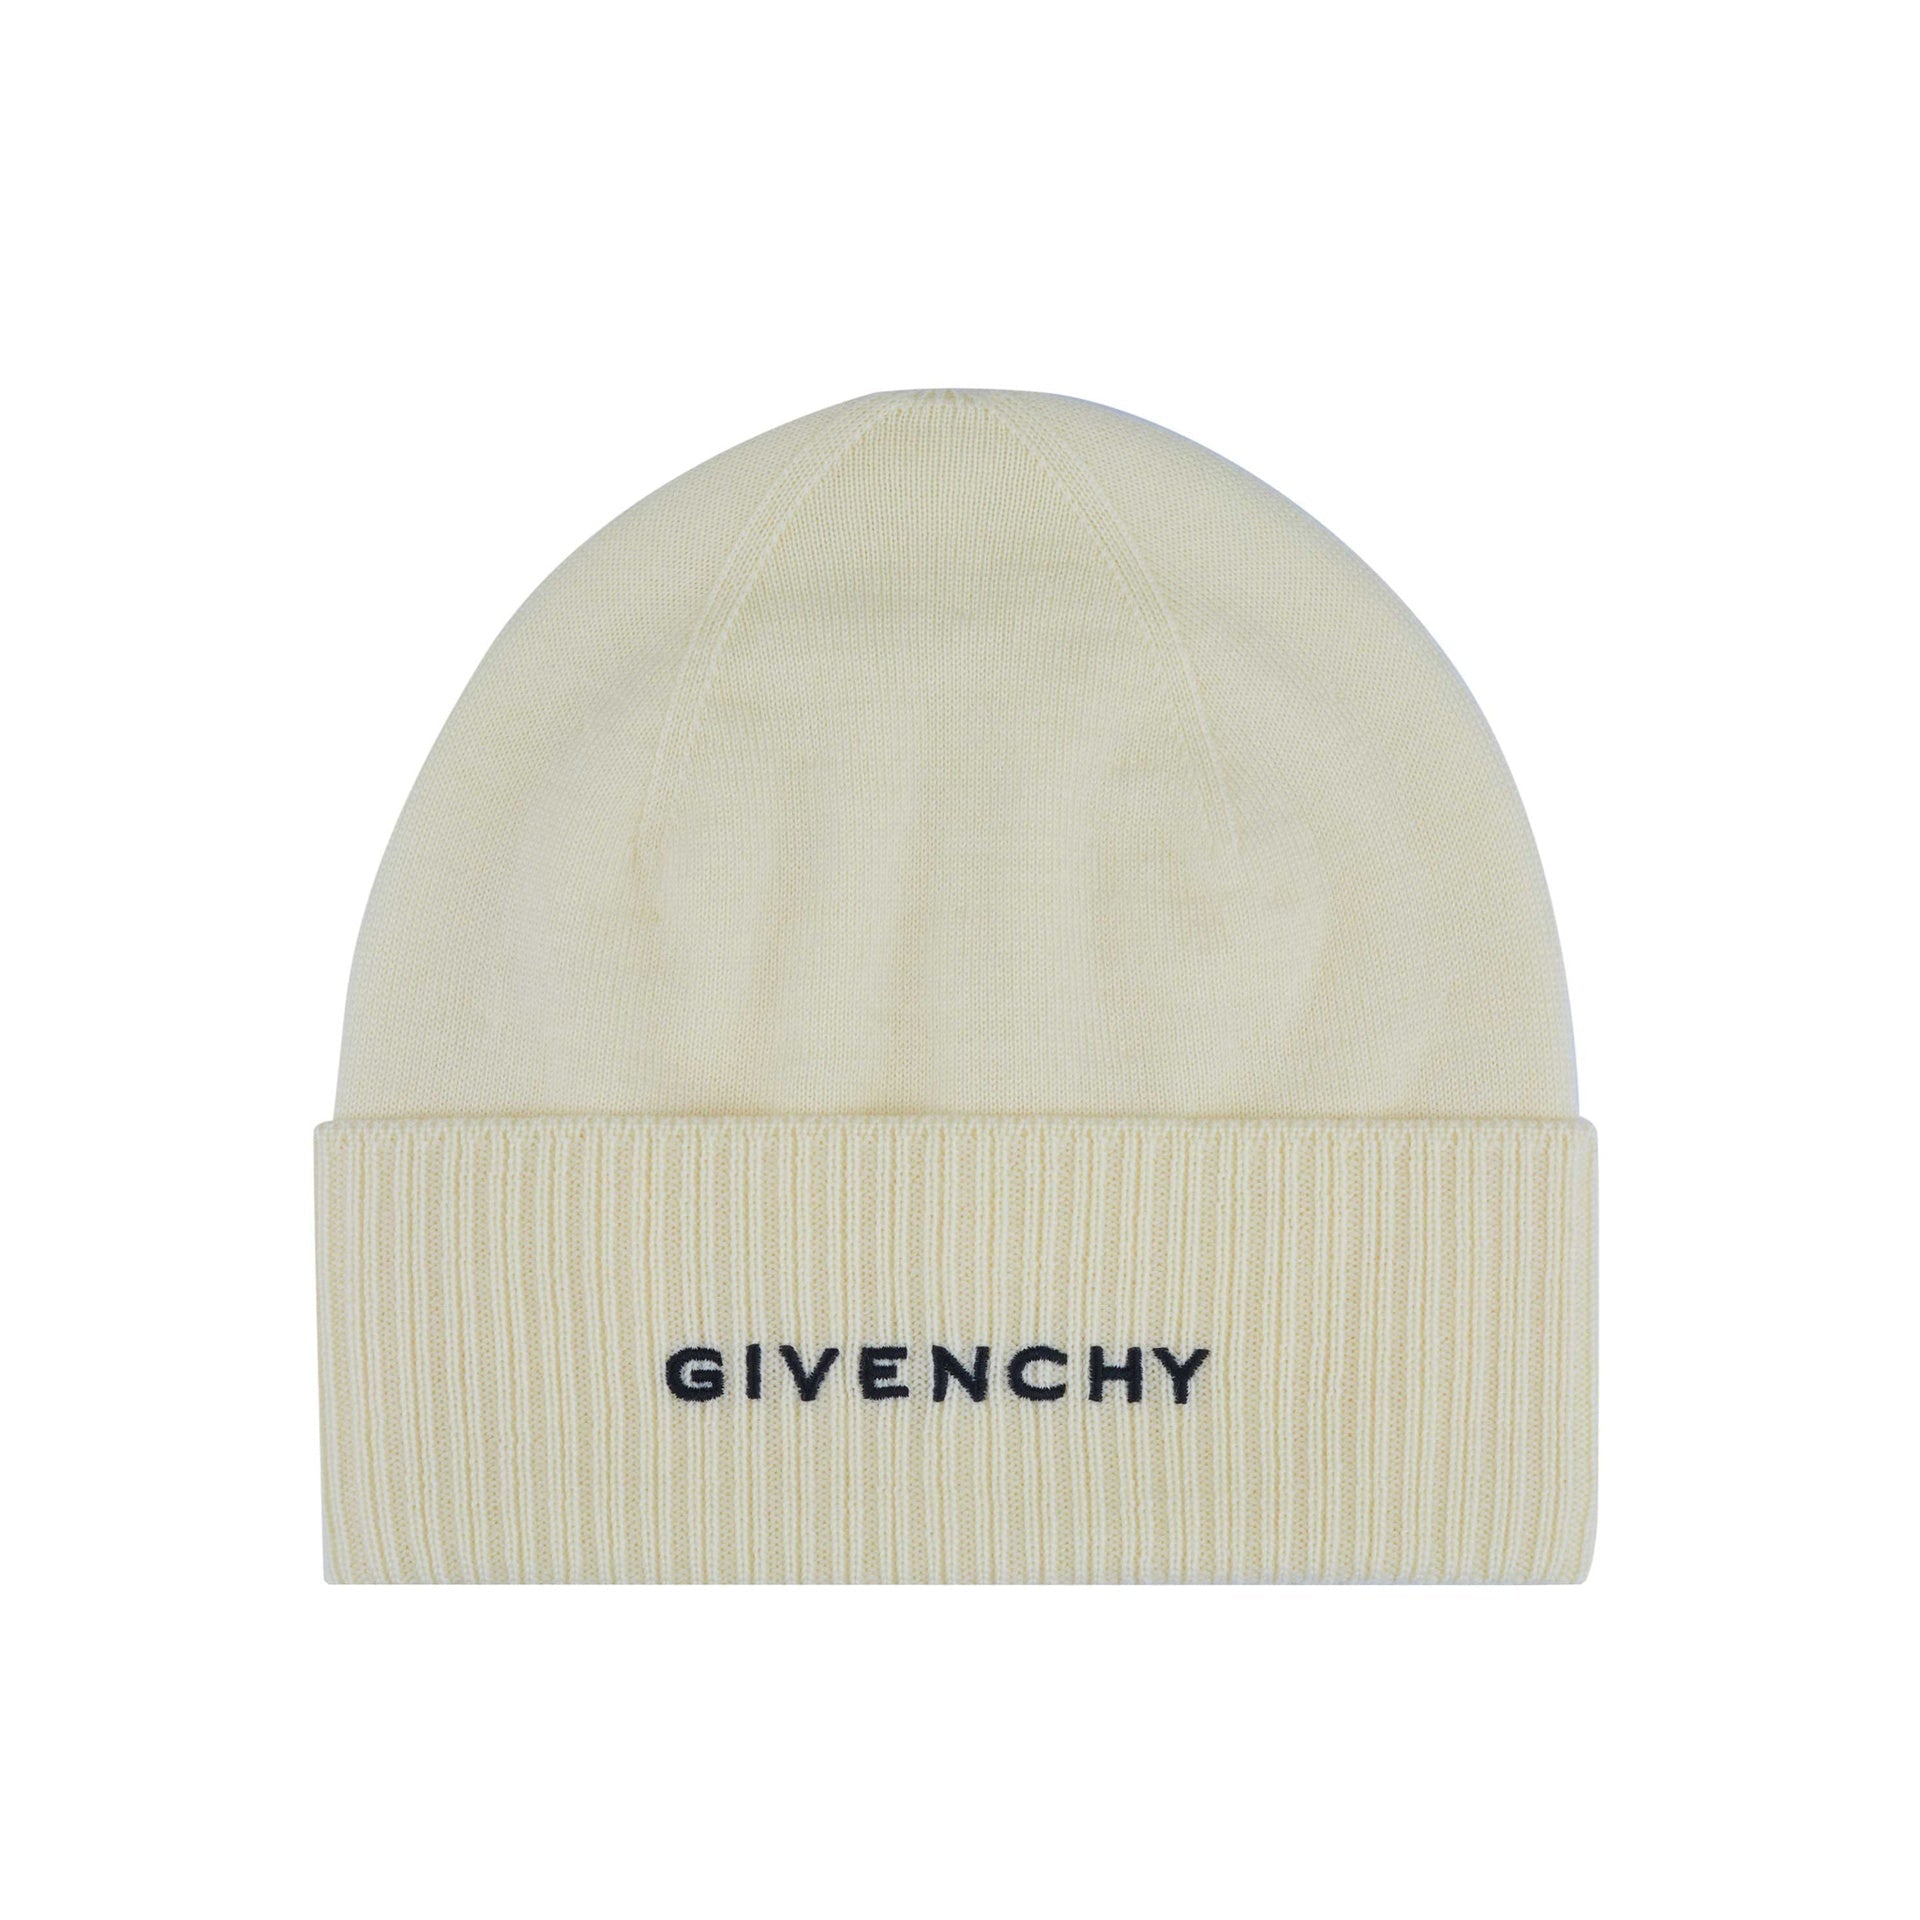 GIVENCHY-OUTLET-SALE-Givenchy-Wool-Logo-Hat-Hute-CREAM-UNI-ARCHIVE-COLLECTION.jpg